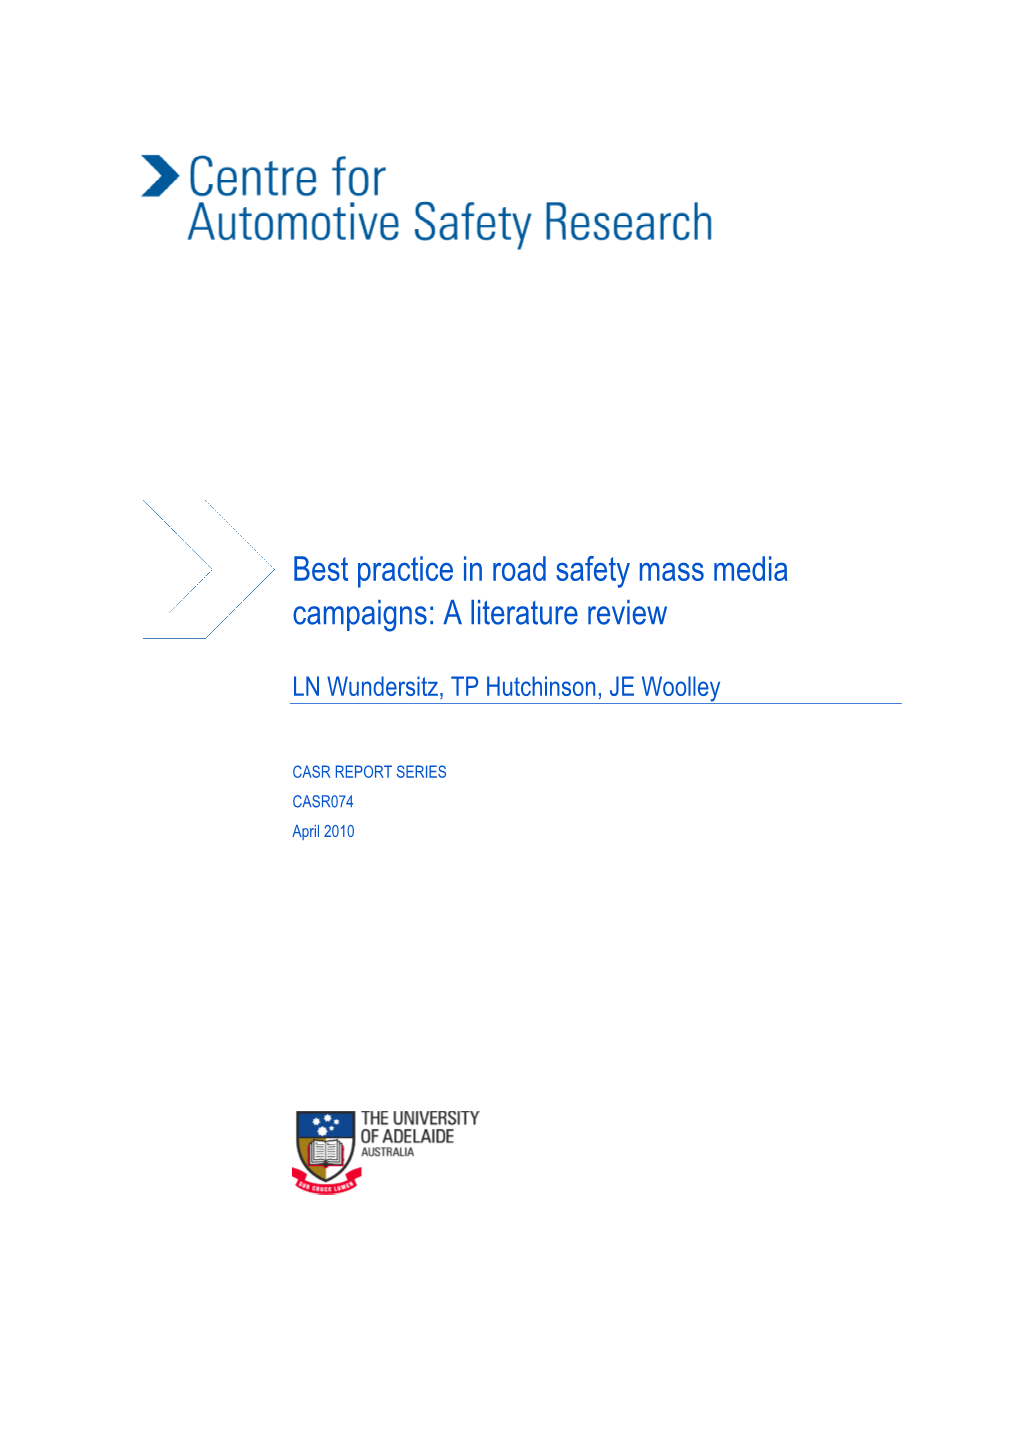 Best Practice in Road Safety Mass Media Campaigns: a Literature Review